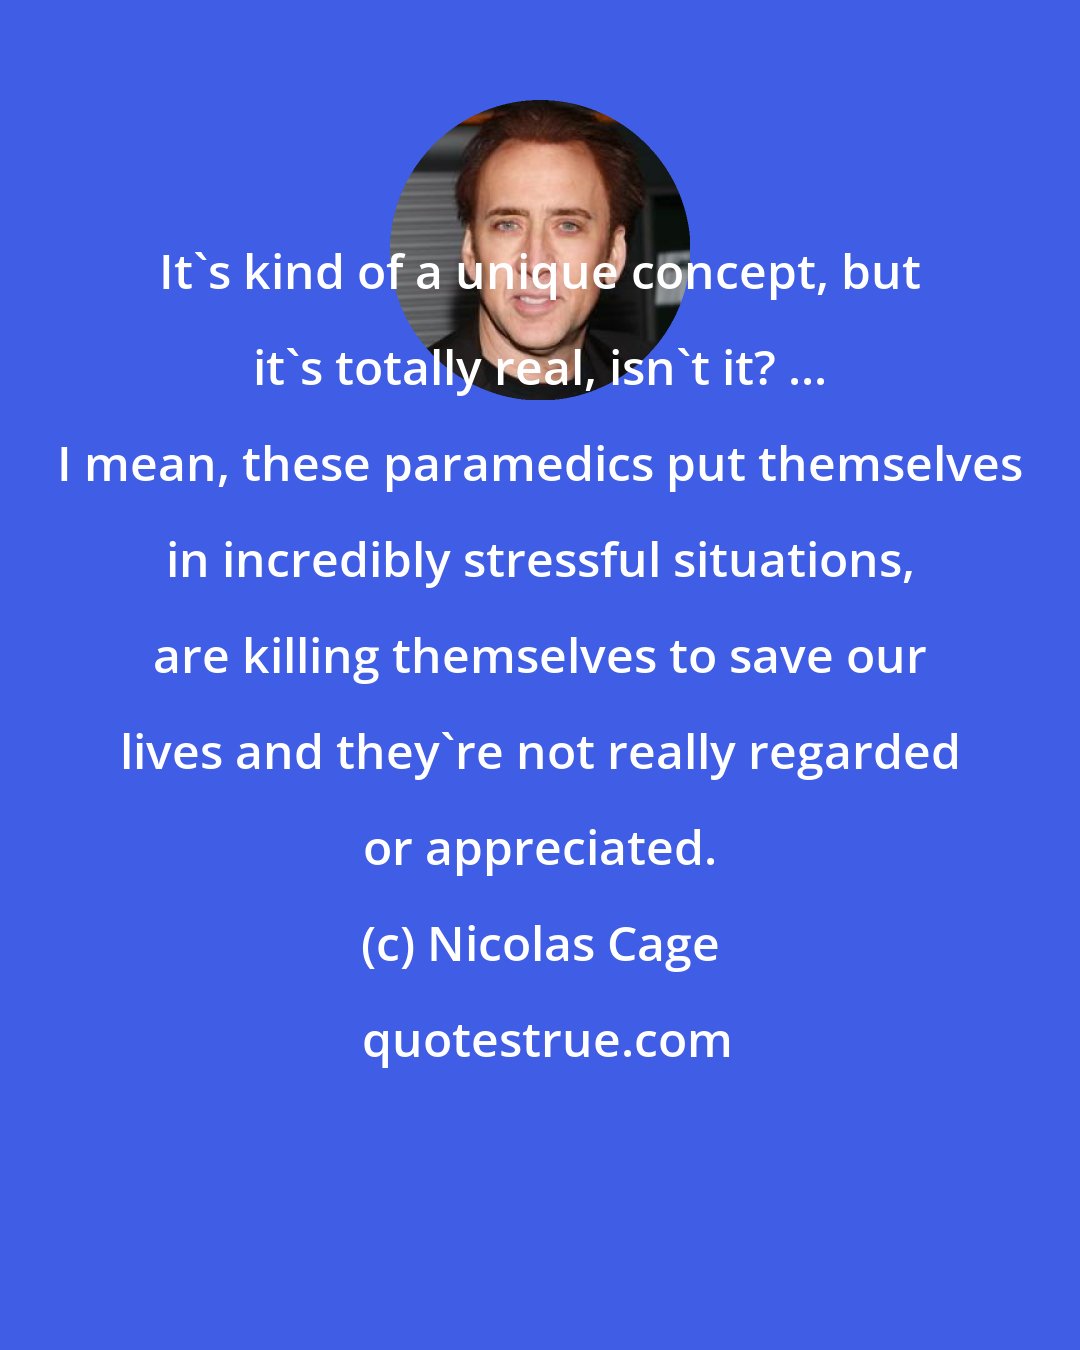 Nicolas Cage: It's kind of a unique concept, but it's totally real, isn't it? ... I mean, these paramedics put themselves in incredibly stressful situations, are killing themselves to save our lives and they're not really regarded or appreciated.